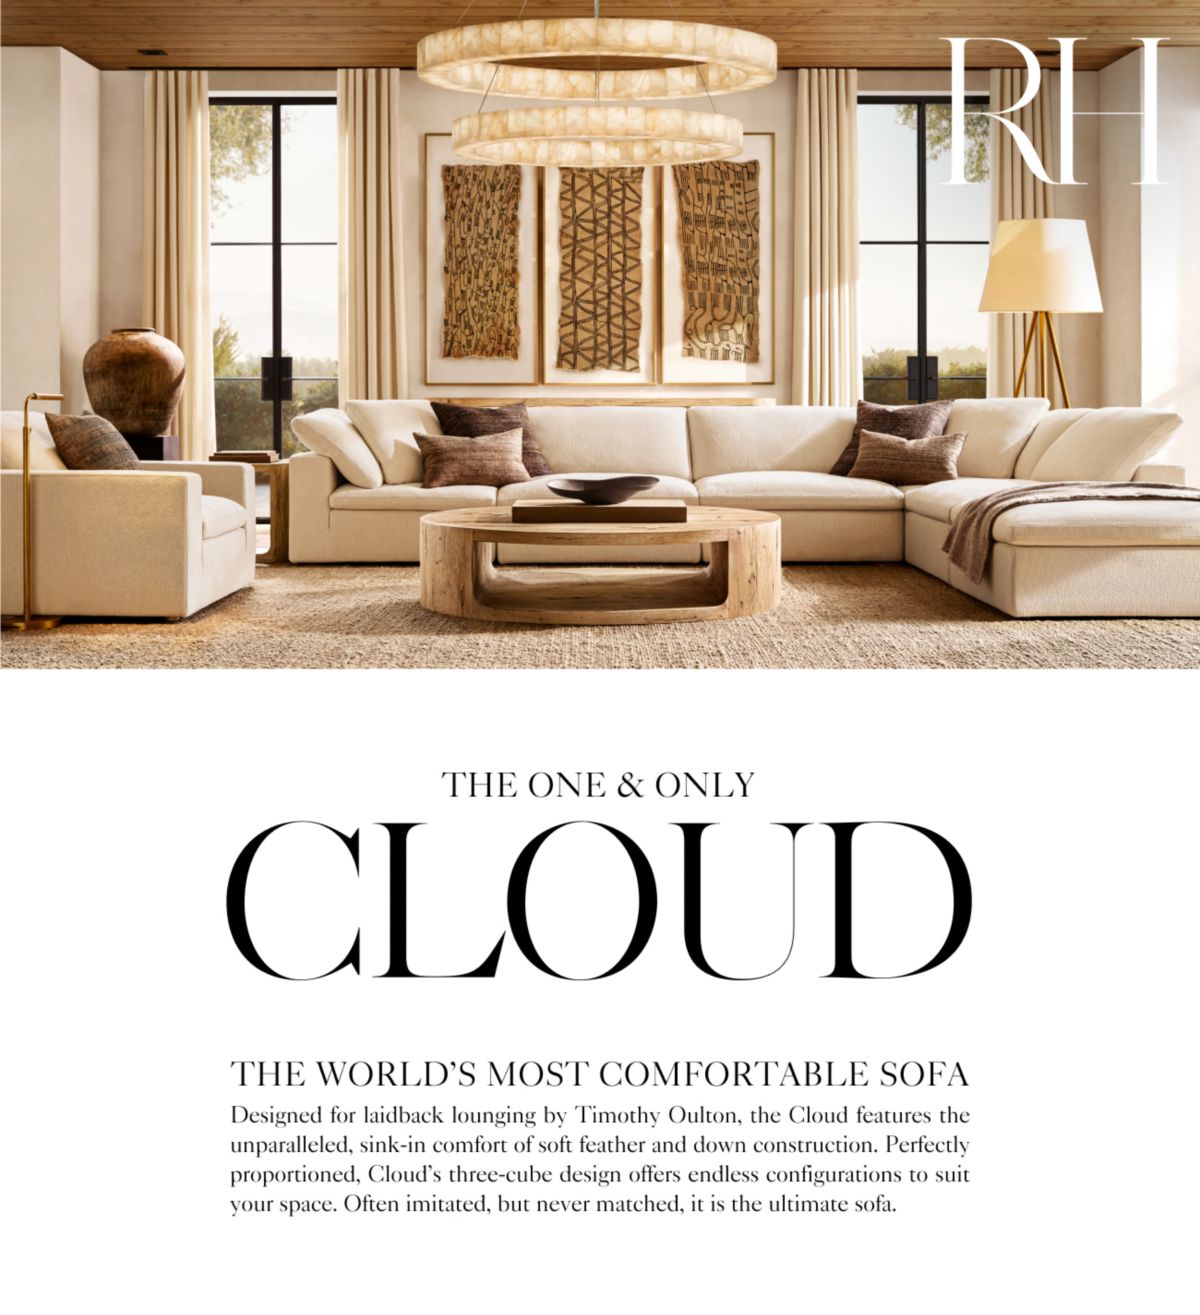 The One & Only Cloud. Discover The World's Most Comfortable Sofa